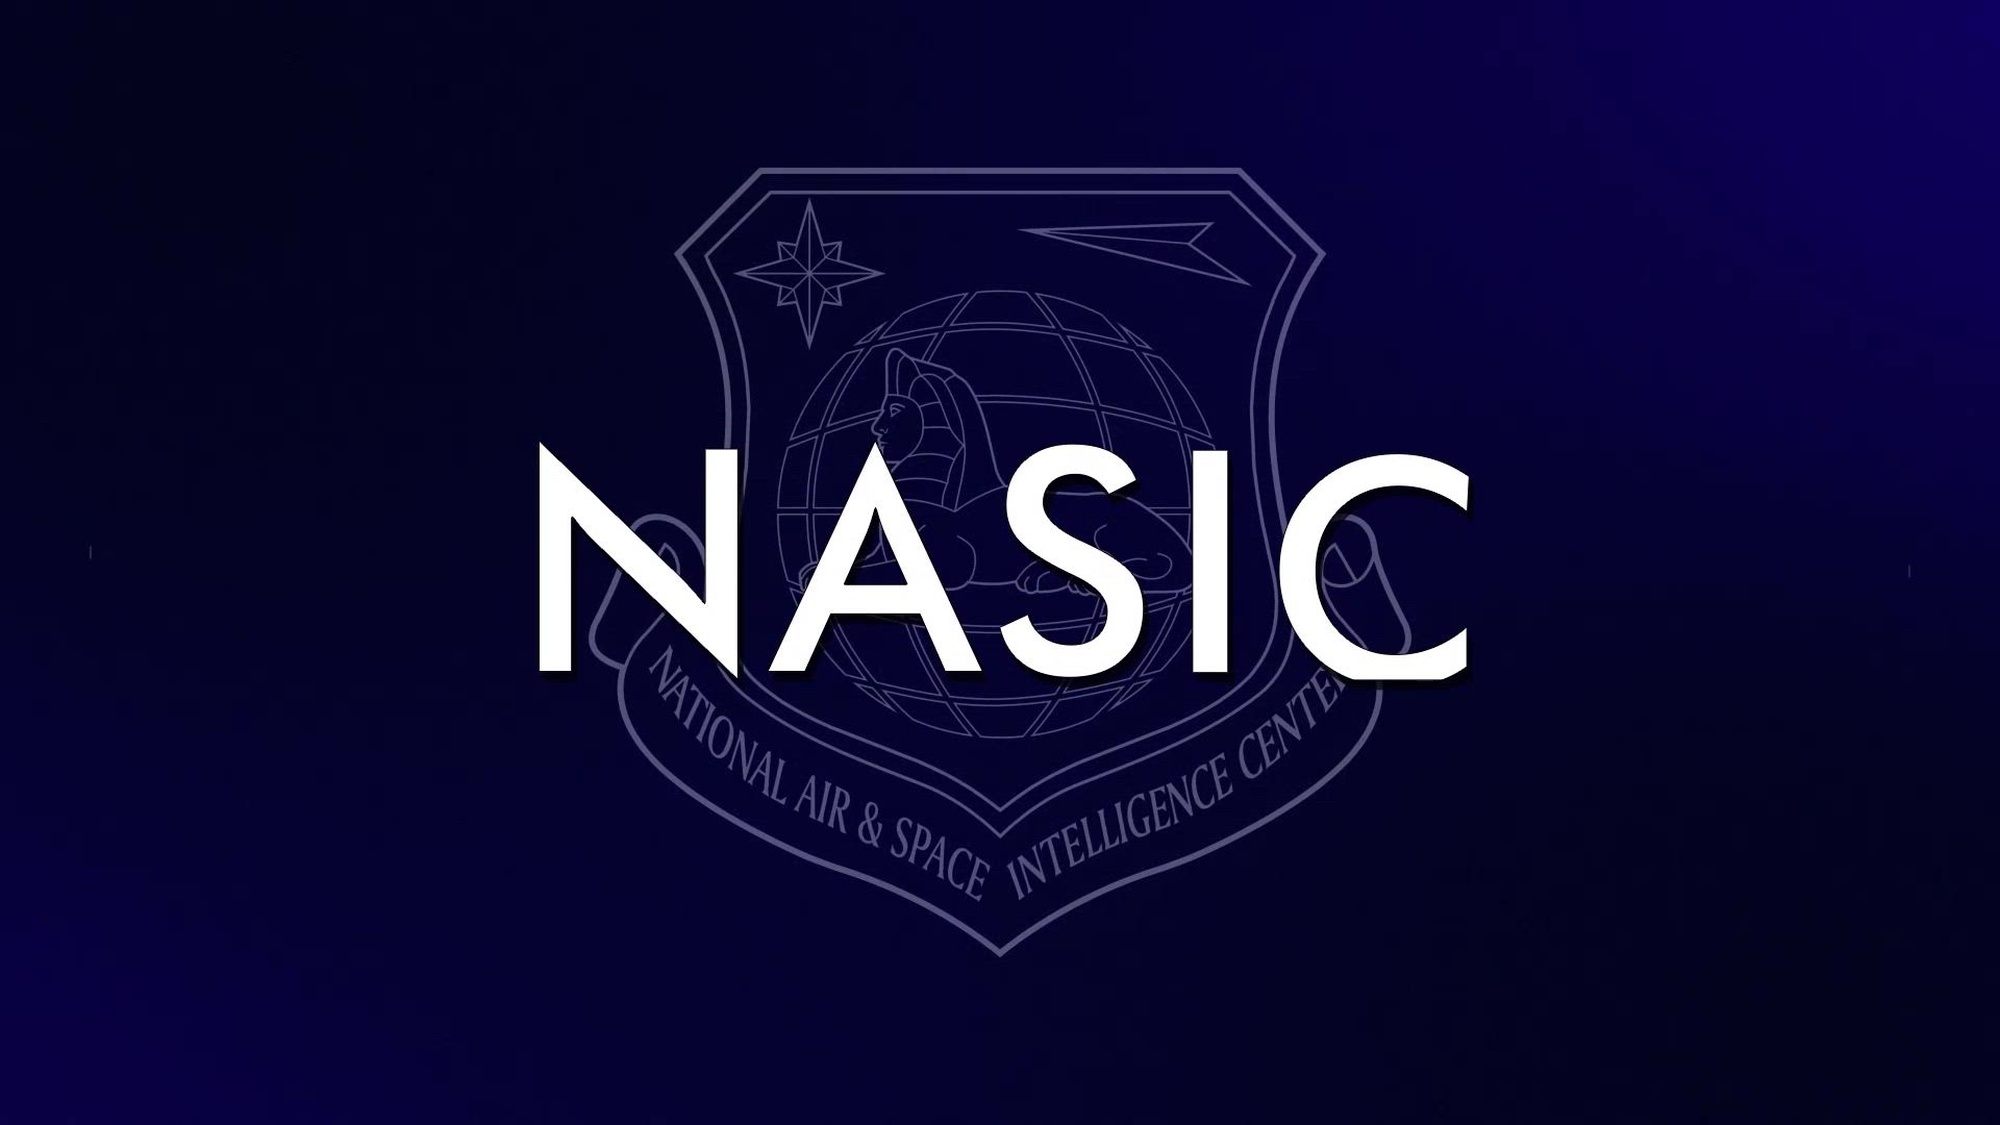 This video provides brief testimonies regarding the NASIC employee experience by recent college graduates.

You went to college to change your life.  Come to NASIC to change the world.

NASIC: The National Air and Space Intelligence Center.  
We lead the nation in scientific and technical intelligence.  
Our subject matter experts give us the edge over our adversaries.
What we do today determines victory or defeat in the future battlespace.
We are the only people who do what we do.

NASIC is really cool because it takes all these different disciplines and puts them together in a room and has everybody work together.
You have experts on various systems, various phenomena, other countries.
This actually gave me an opportunity to serve my country.
It’s just someplace that directly contributes to the nation’s security.
I feel like NASIC has a unique opportunity where you get paid well for what you do and you are working a mission where you literally cannot do this anywhere else.
The stuff I get to work on is only known by about 20 people and we actually call it magic and sorcery in the office…and that’s kind of what I get to do everyday: I get to work on magic and sorcery.
There is a lot of opportunity for growth, you know, you don’t have to stay in one place for too long if you don’t want to.
I’ve been much happier, my mental health has been much better since becoming a government civilian and working for NASIC.
I love, I love my coworkers… It does not feel like a job, it’s a second home to me.   

We’re growing and we want you to grow with us.  When you work at NASIC, you can change the world.

If you want to be part of this team, you can learn more on our LinkedIn page or apply directly through HireVue.